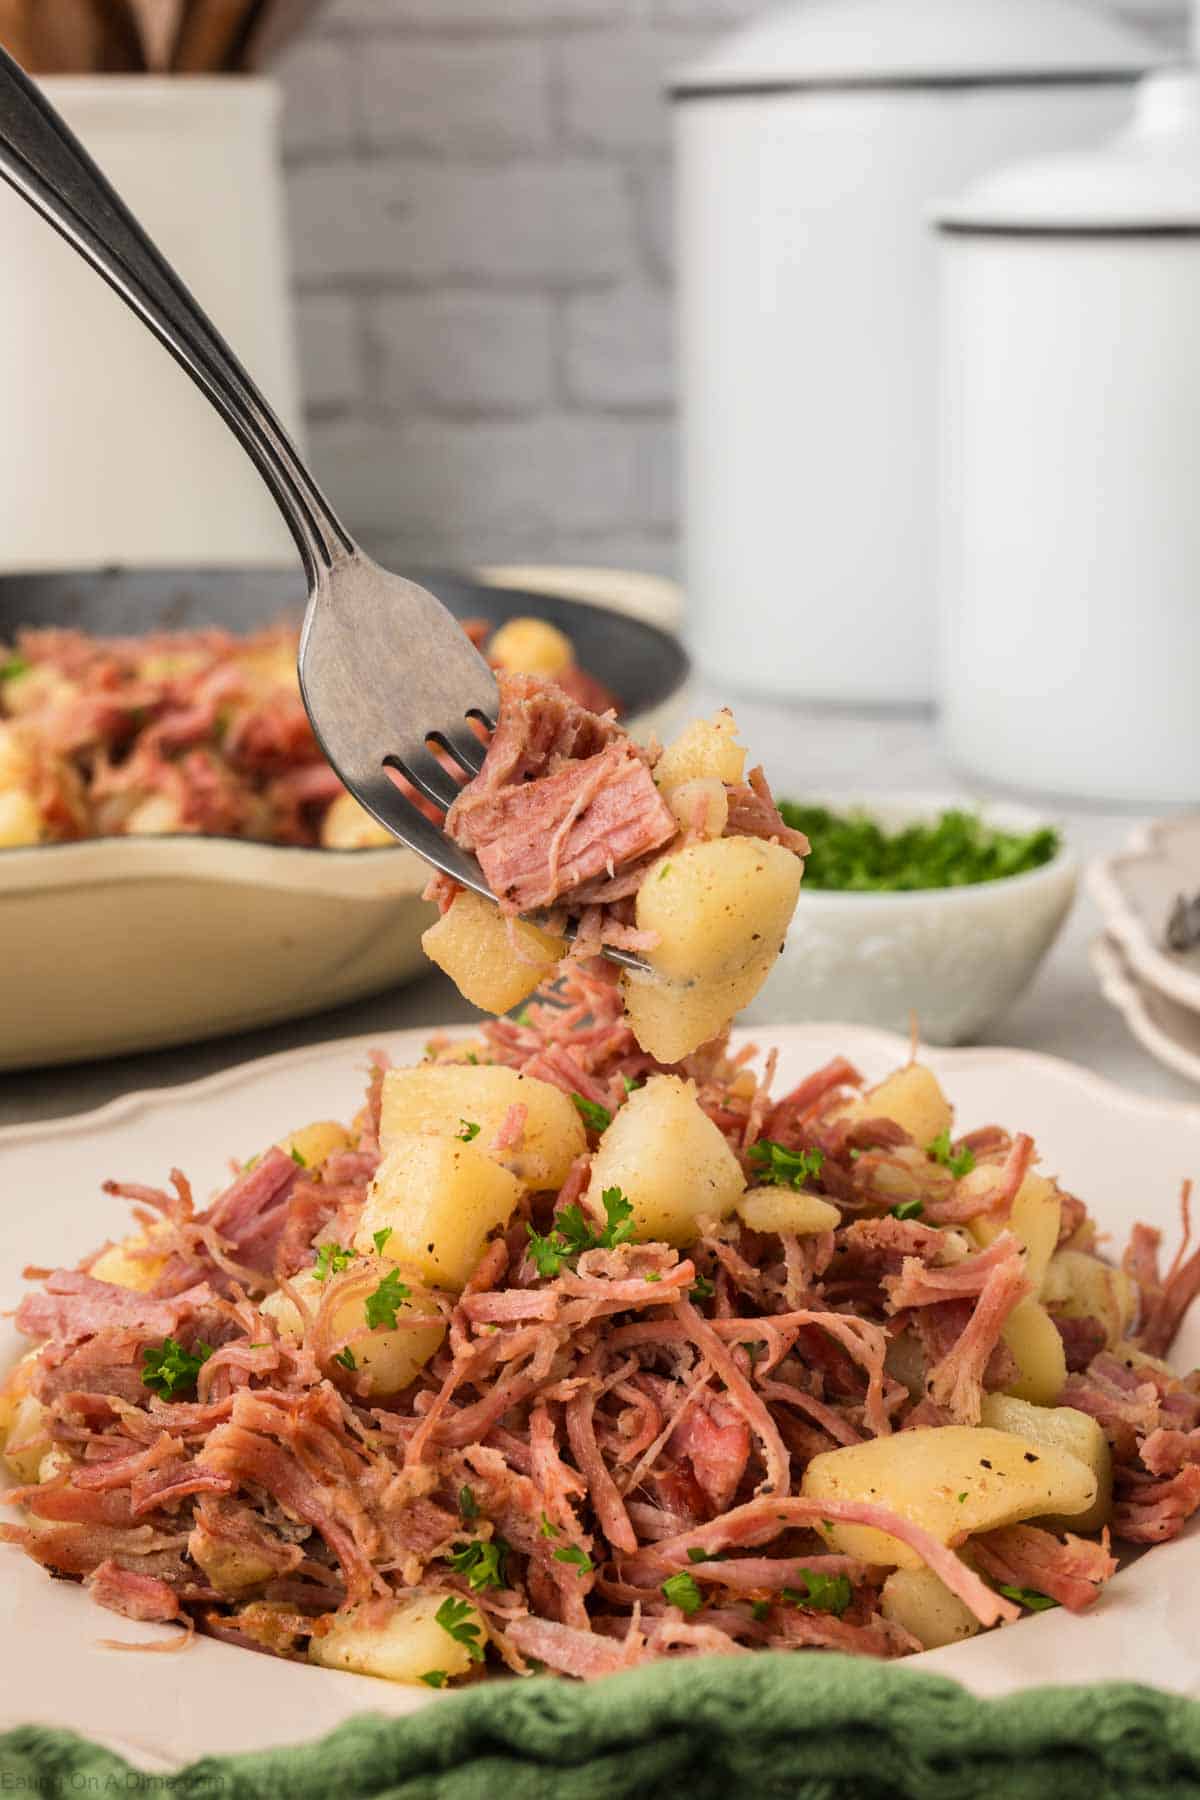 Close up image of corned beef on a plate with a serving on a fork